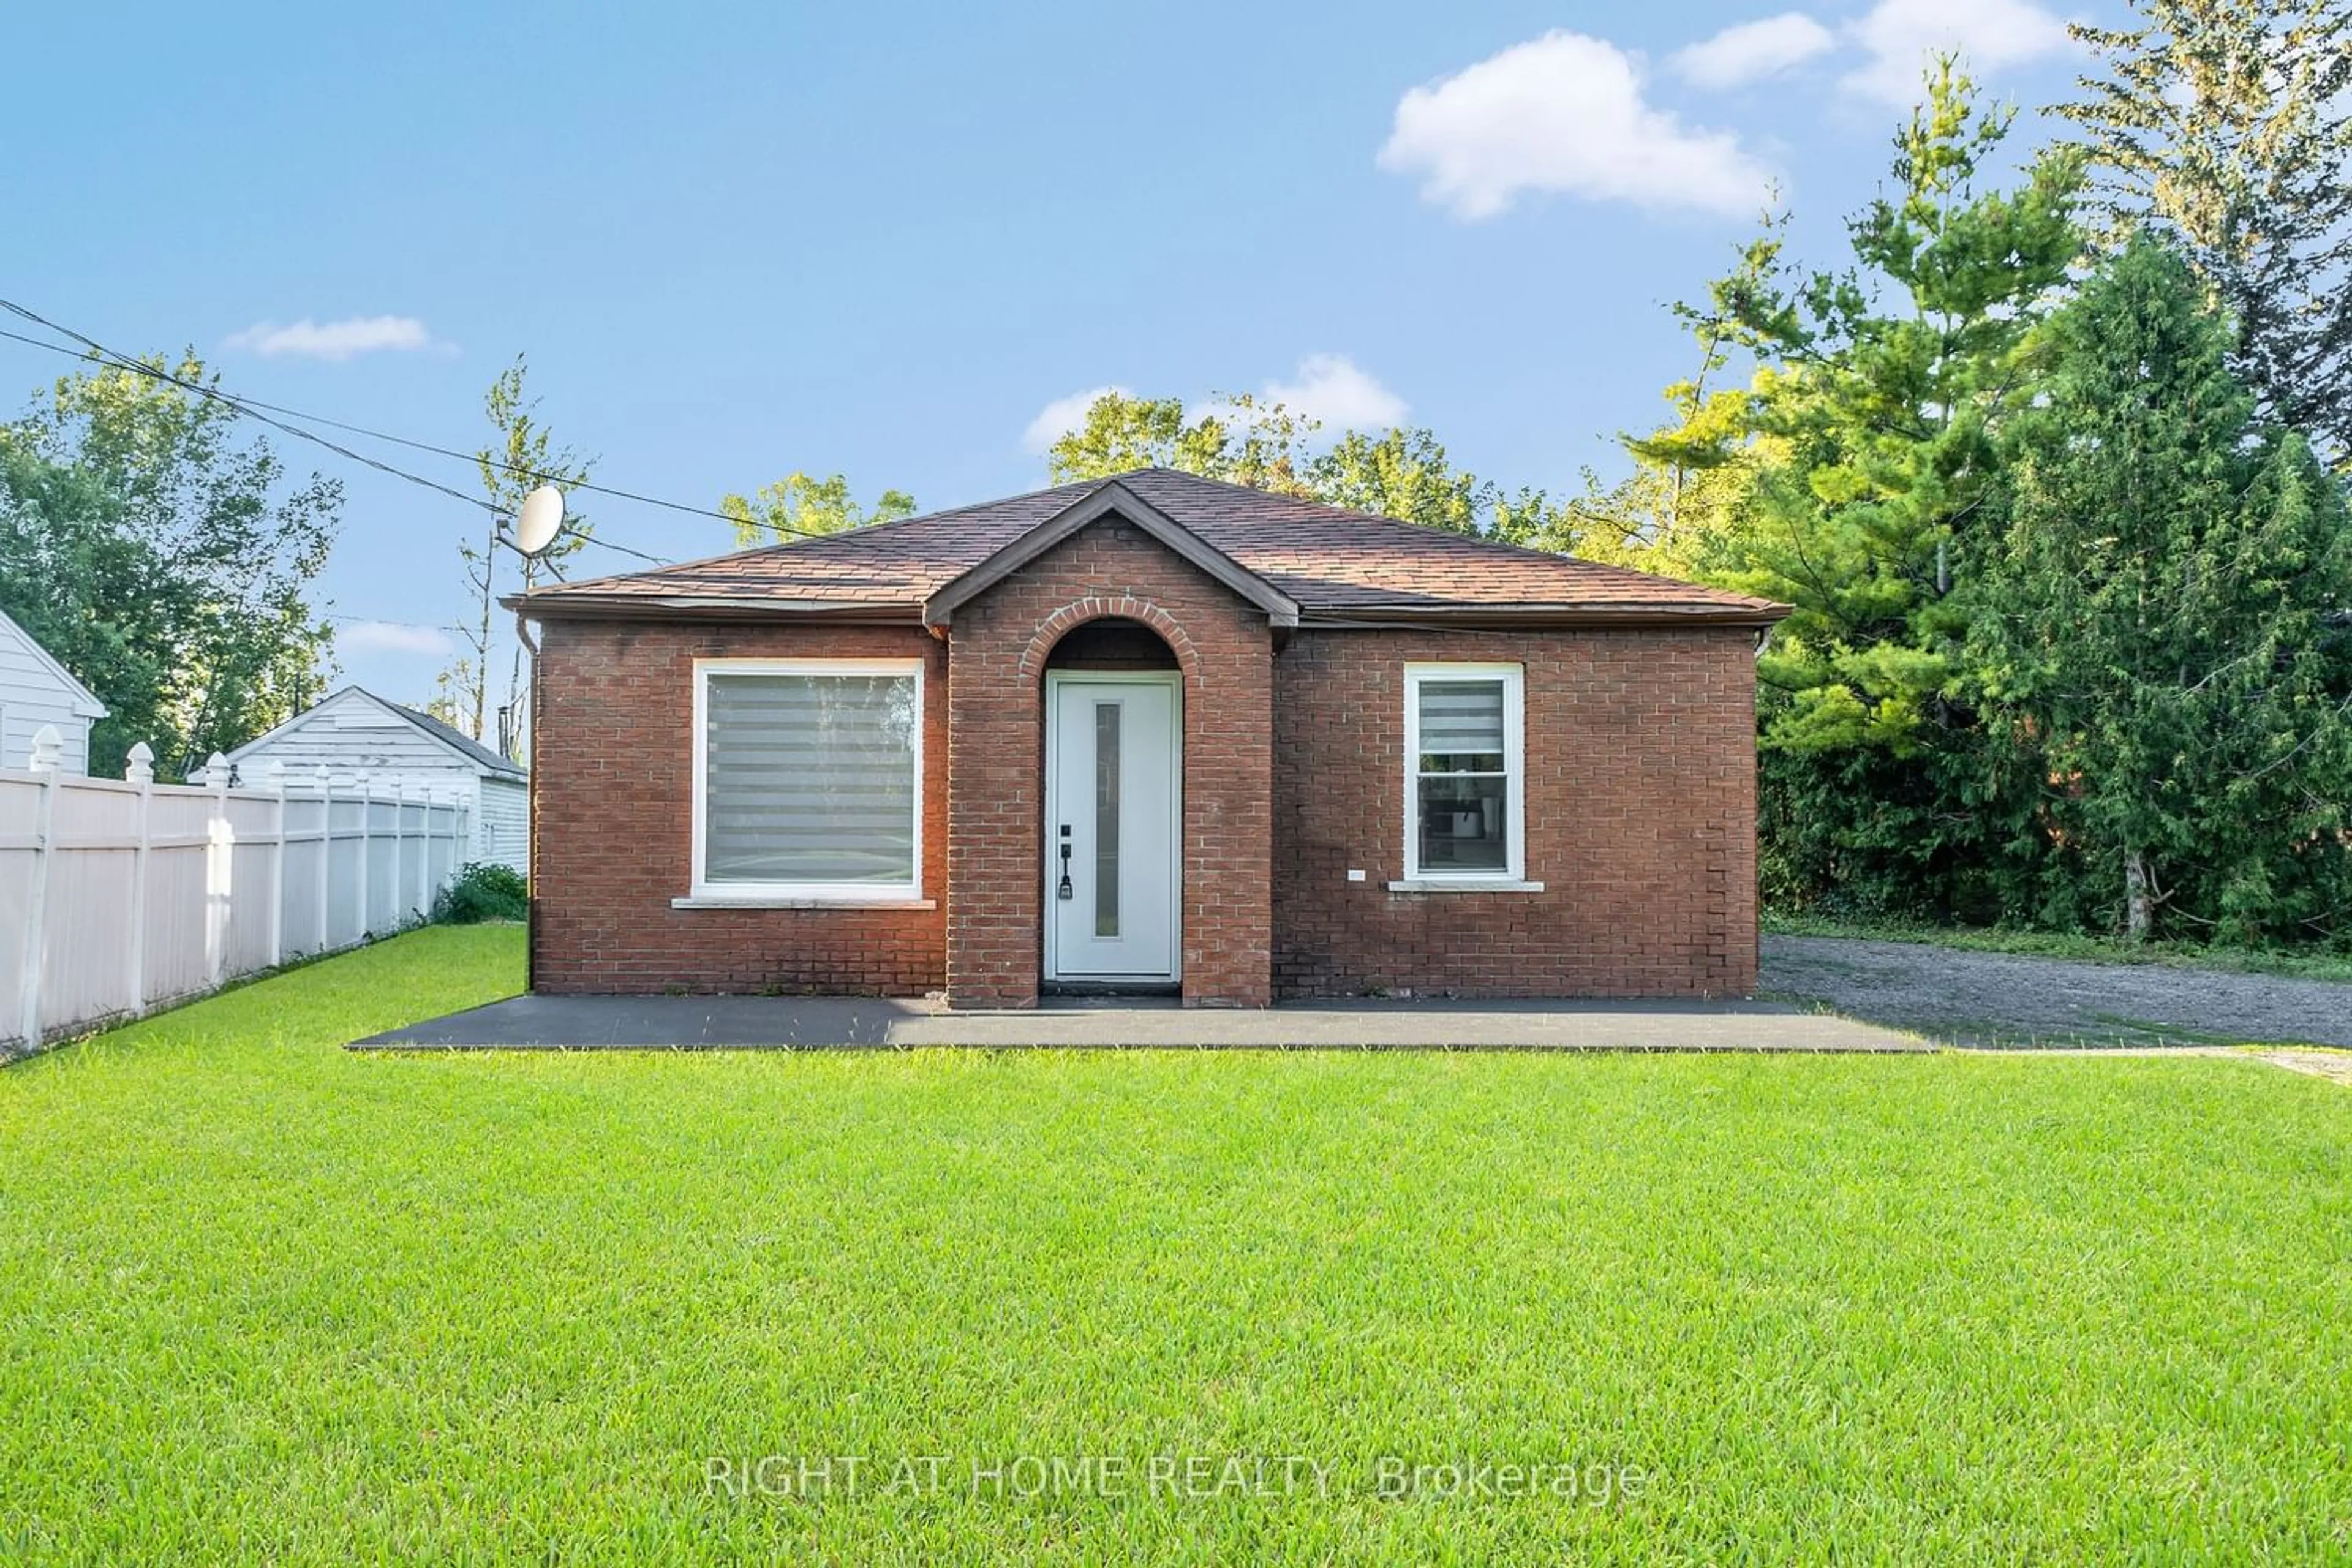 Home with brick exterior material for 364 Bridge St, Belleville Ontario K8N 4Z2